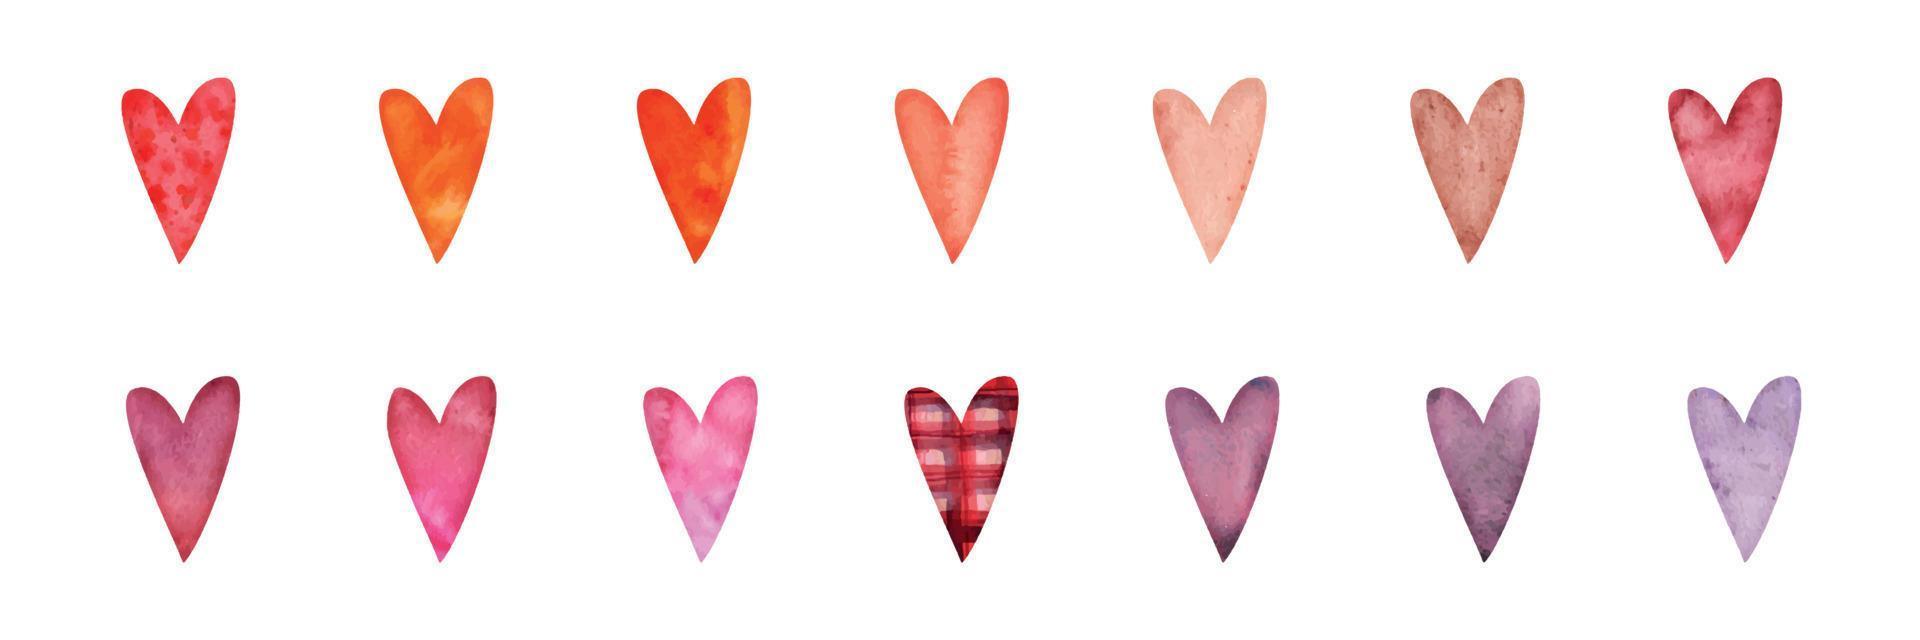 Watercolor hand drawn set of objects, textured red, pink and purple hearts for Valentine's day. Isolated on white background. Design for paper, love, greeting cards, textile, print, wallpaper, wedding vector